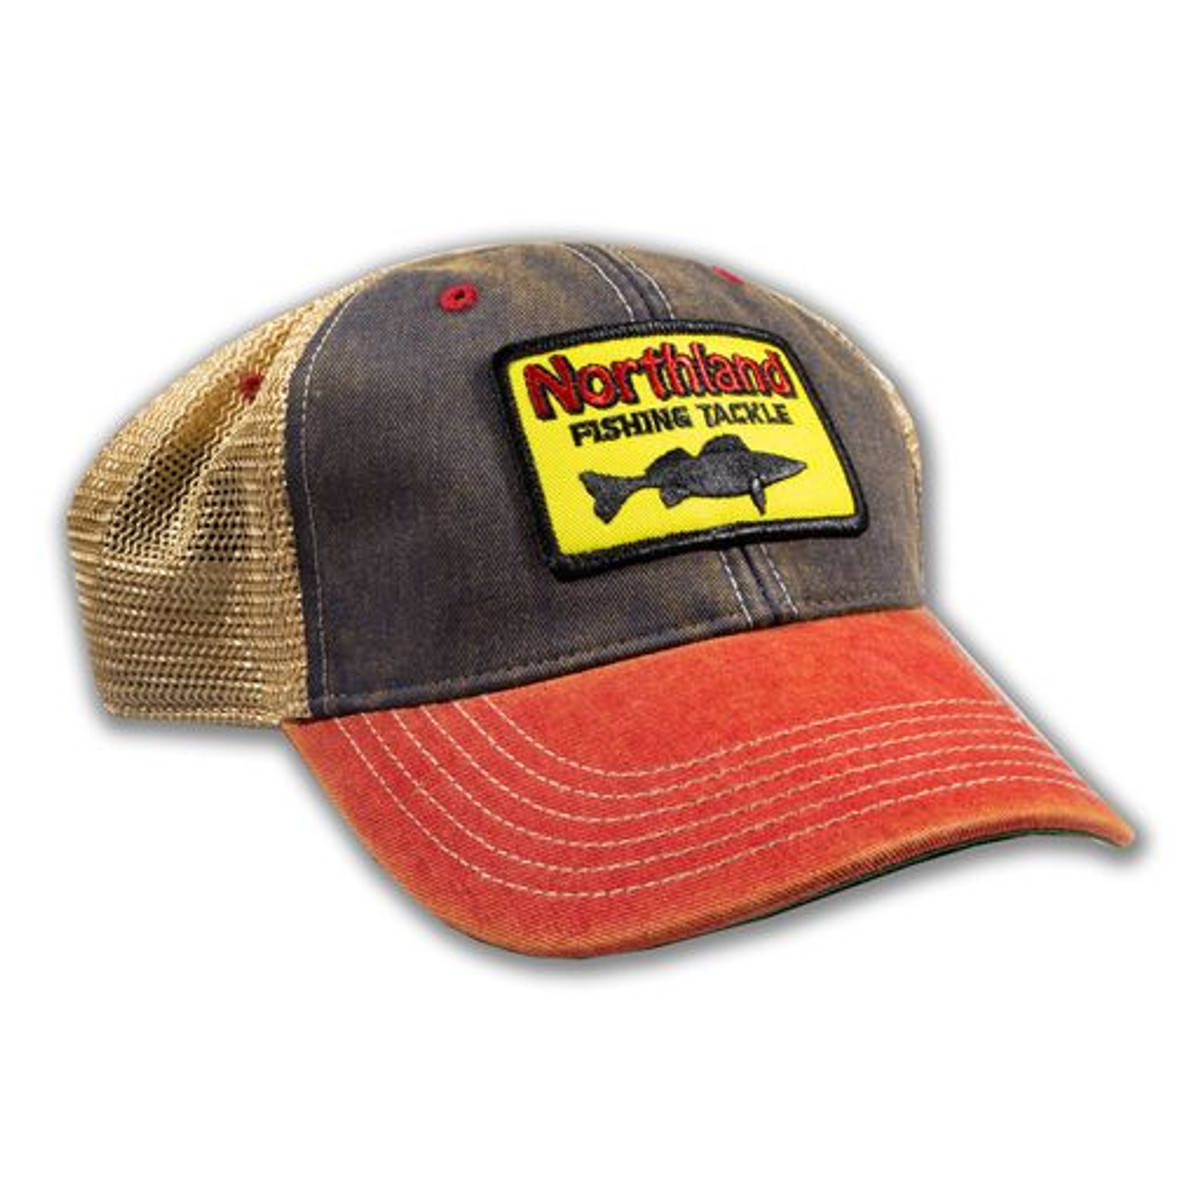 Northland Hat Navy/Red - Northland Fishing Tackle